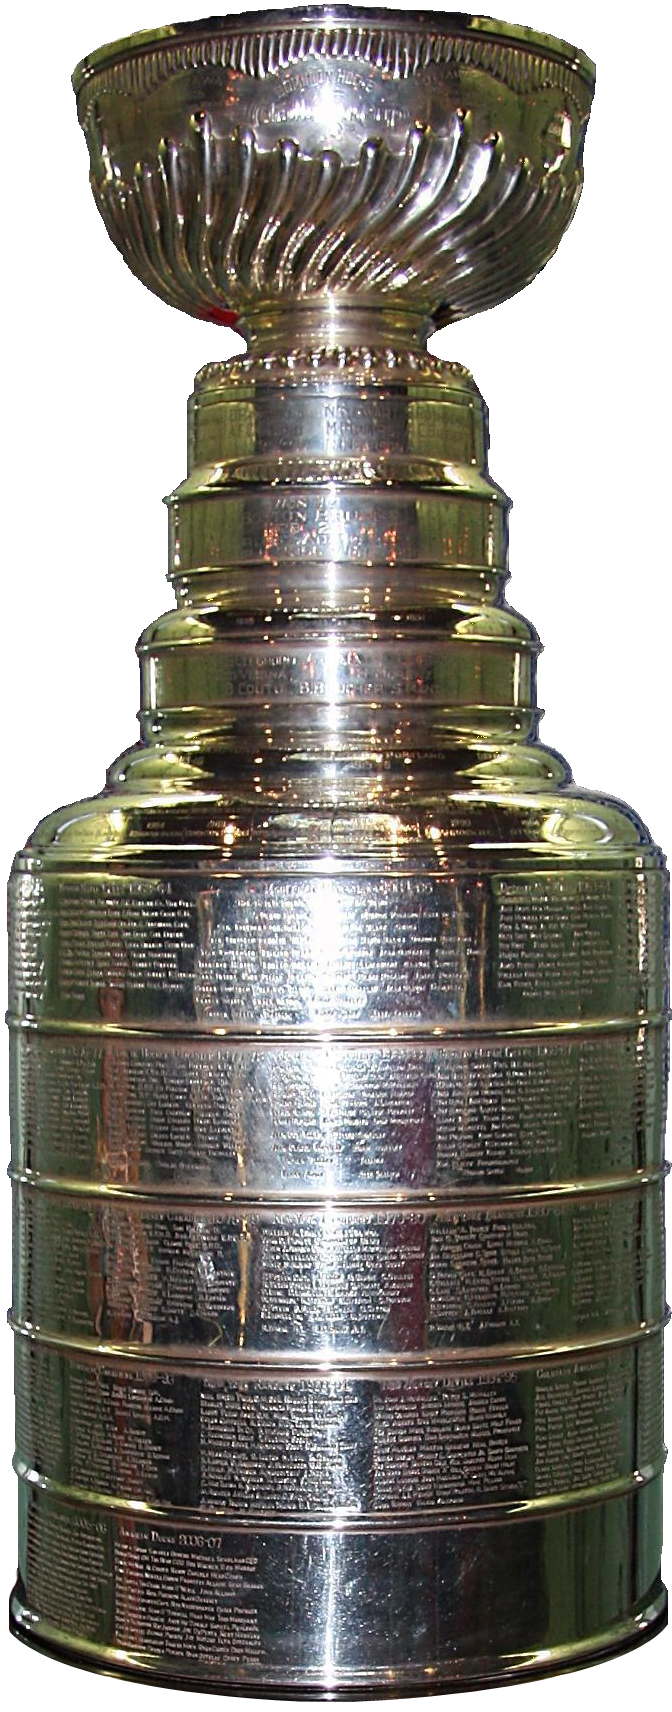 https://static.wikia.nocookie.net/internationalhockey/images/4/45/Stanley_Cup.png/revision/latest?cb=20150806001245